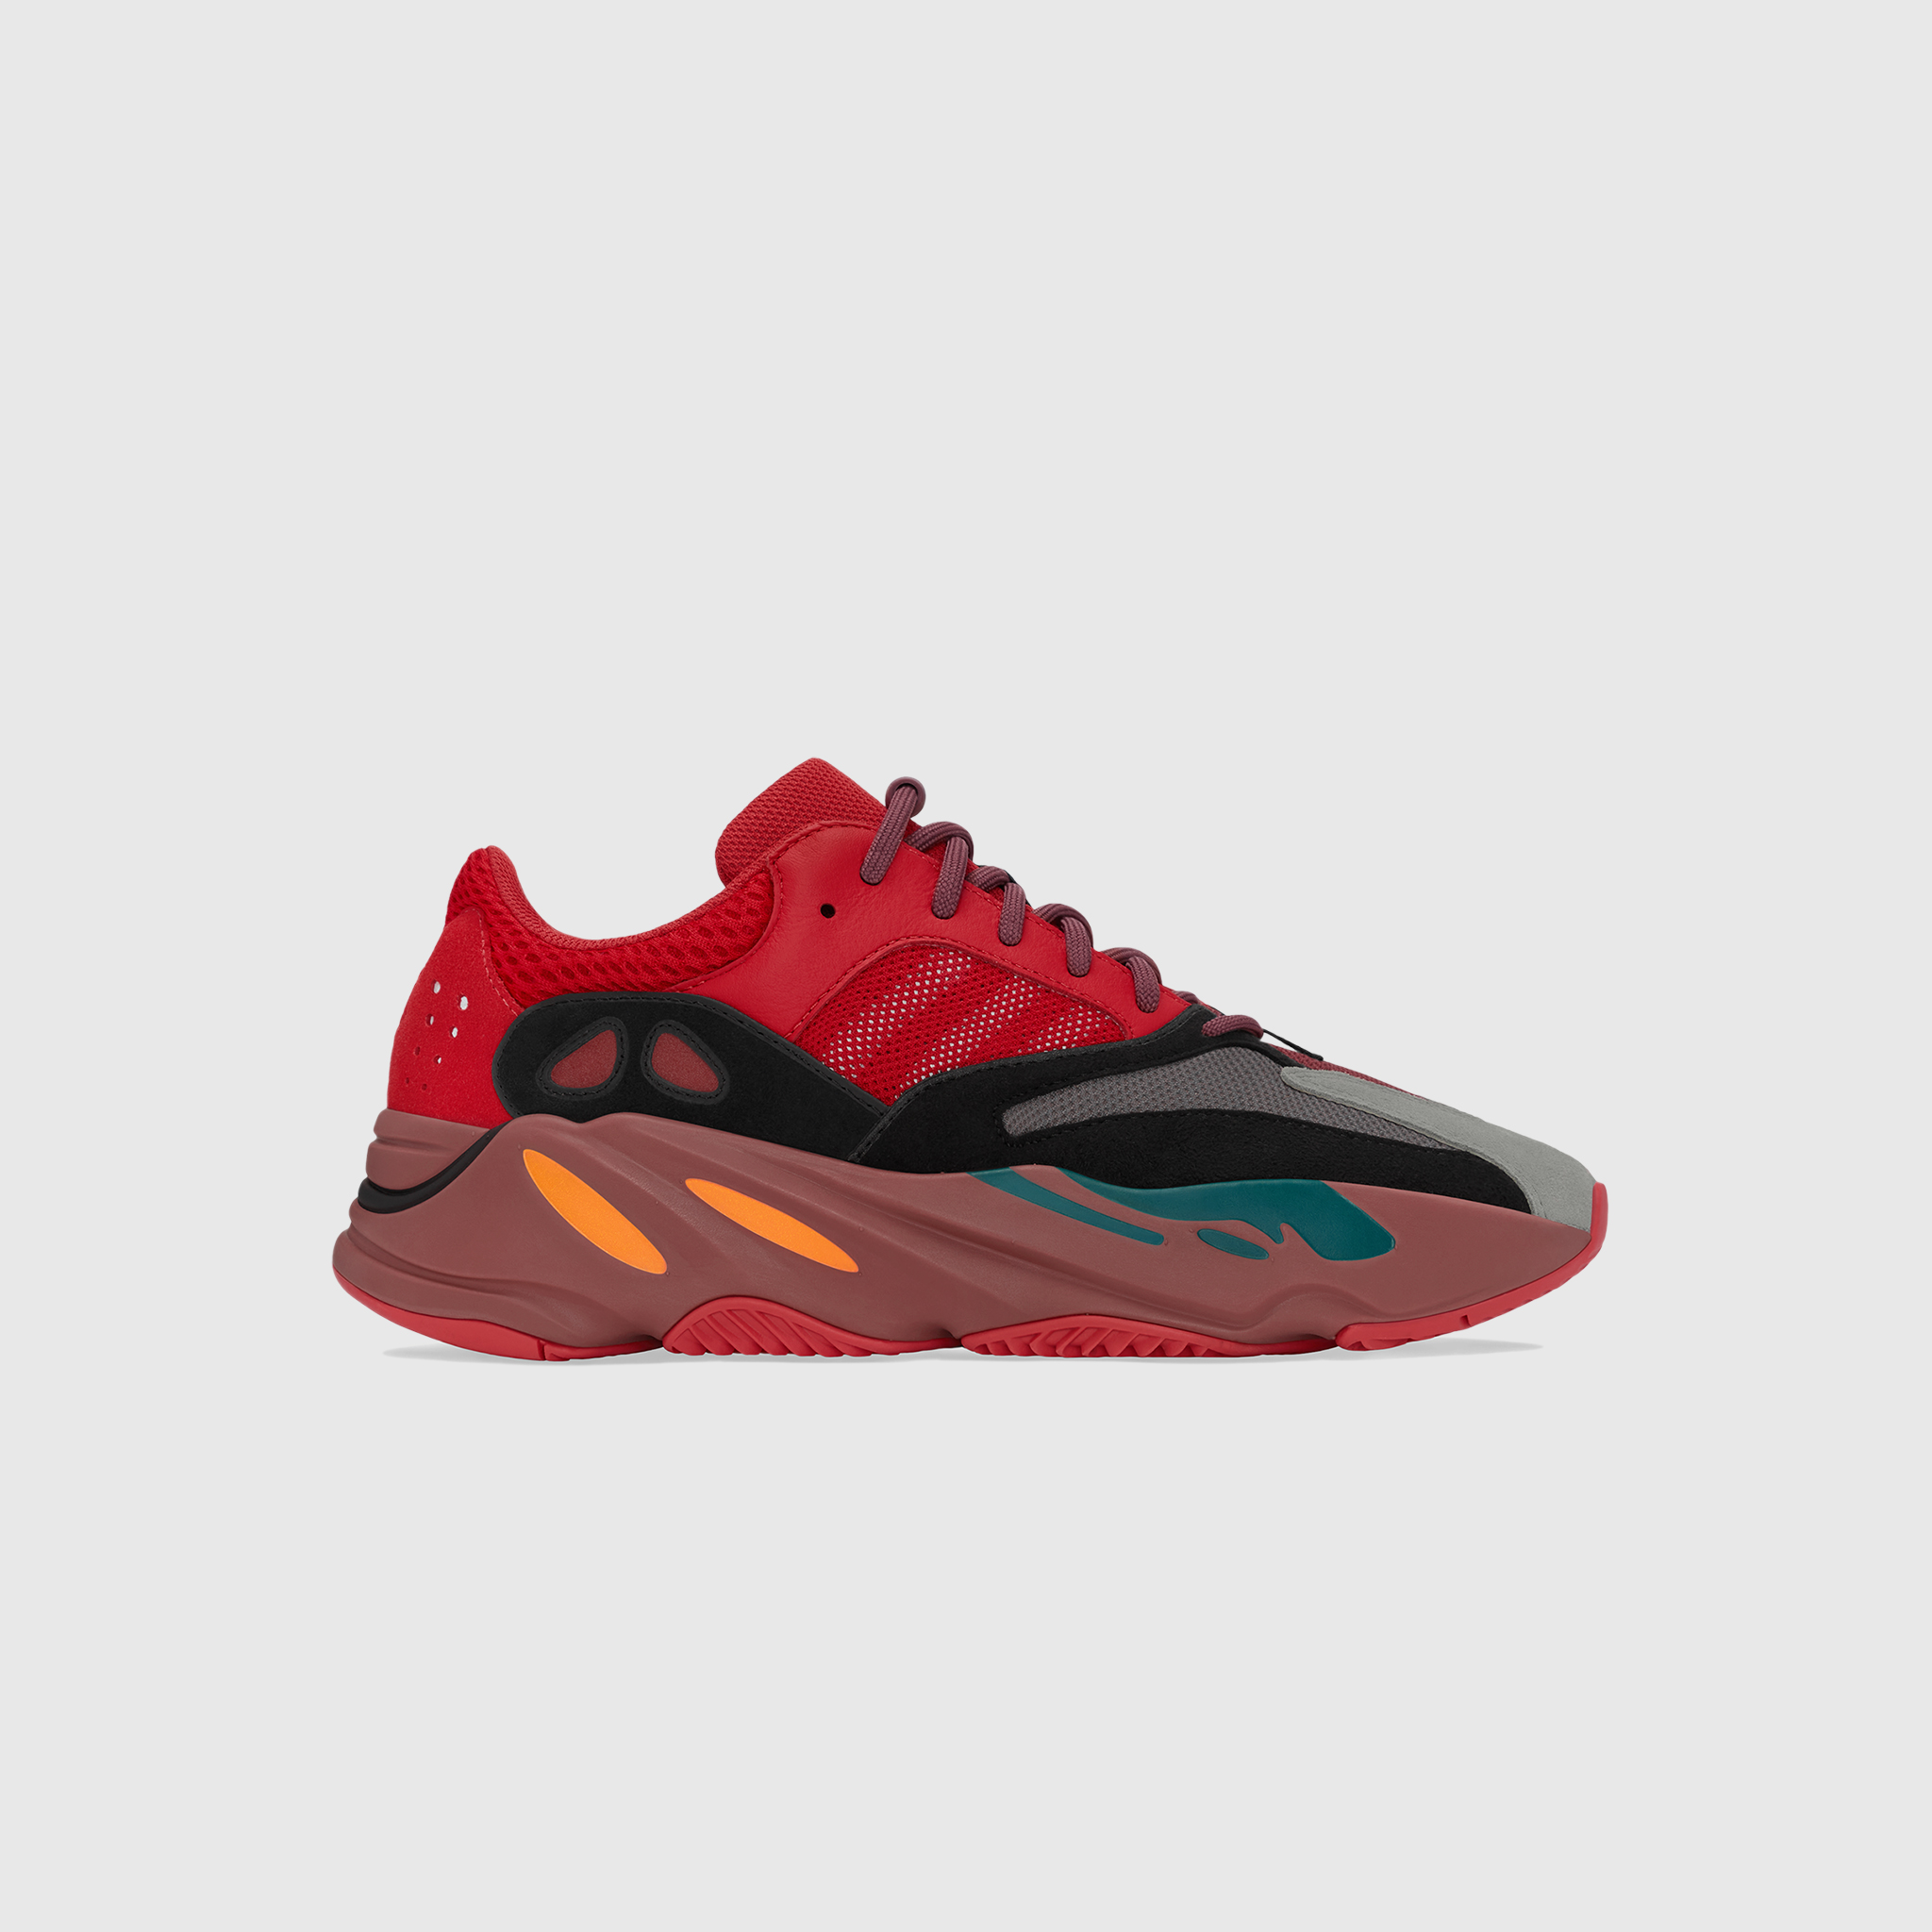 red yeezy 700